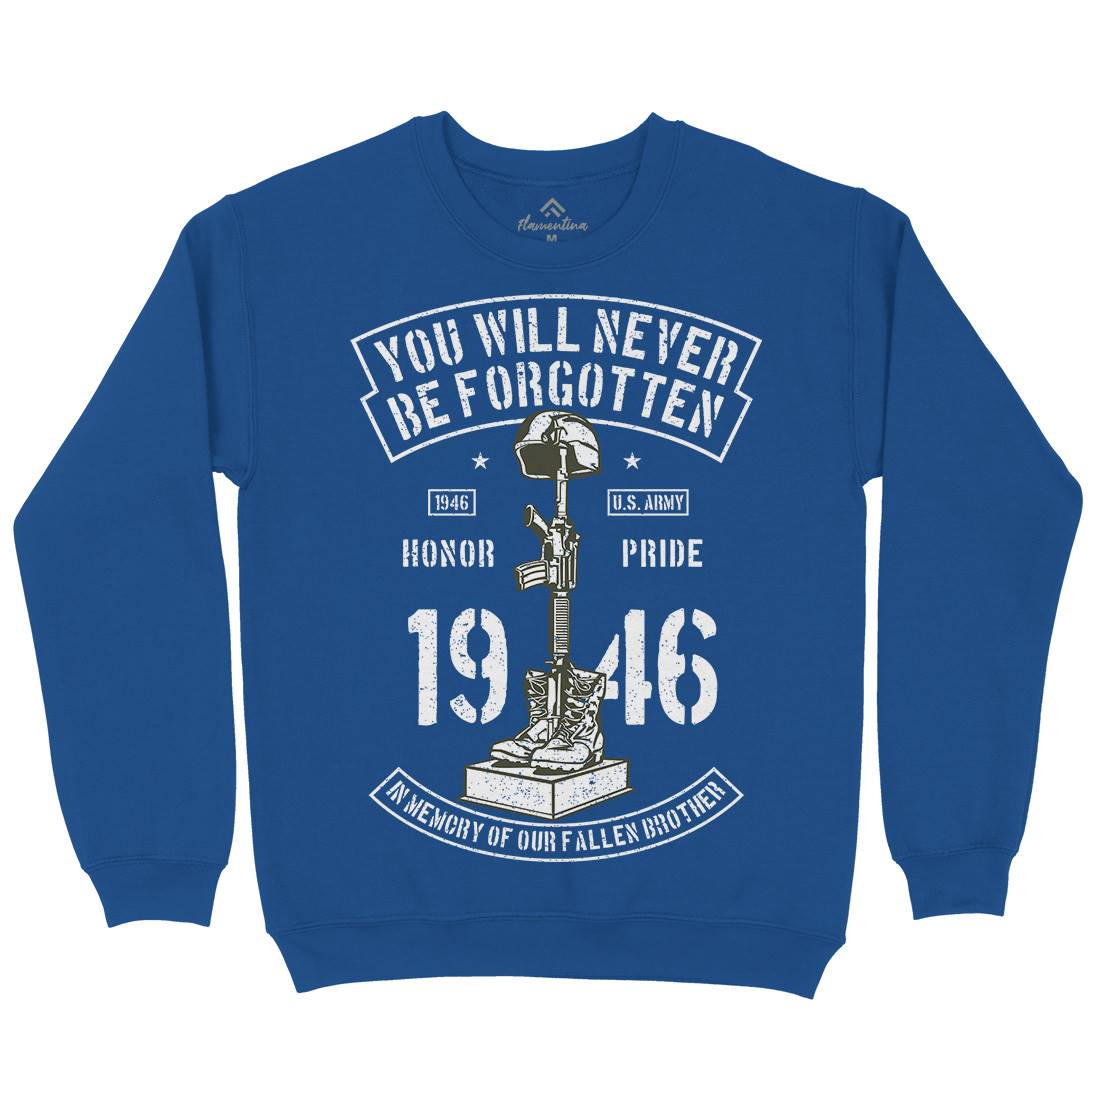 You Will Never Be Forgotten Kids Crew Neck Sweatshirt Army A800